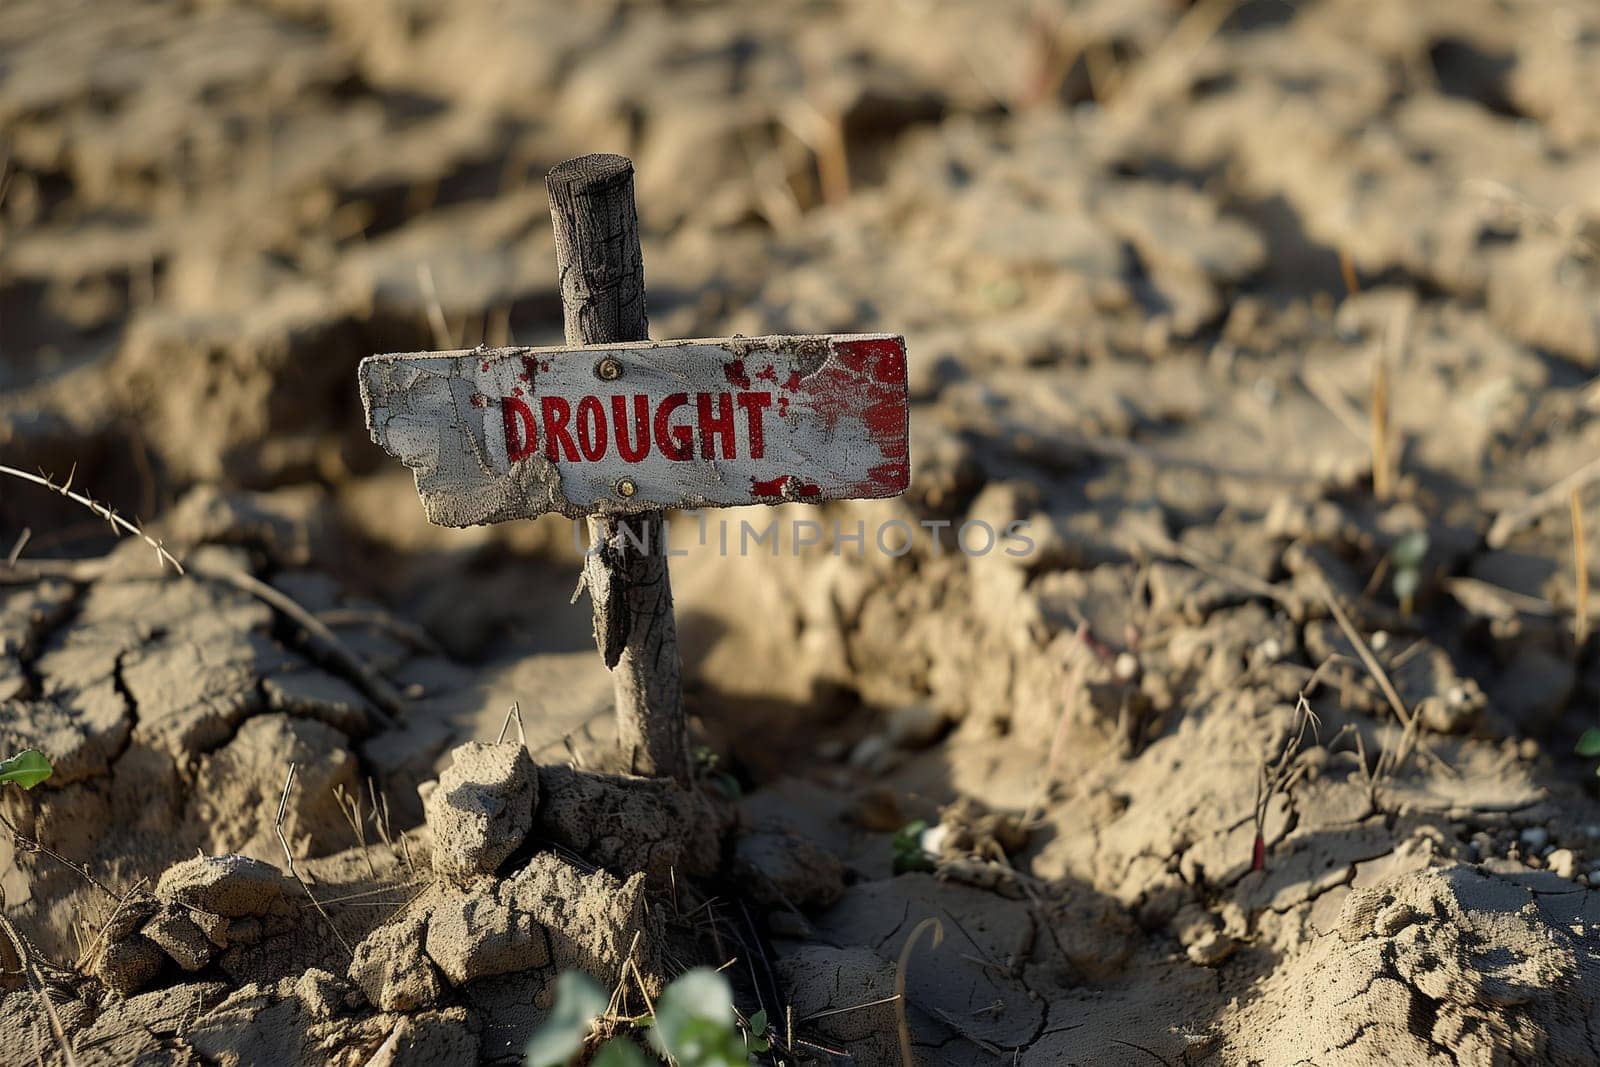 Drought Crisis Highlighted by Wooden Sign on Cracked Earth by Sd28DimoN_1976